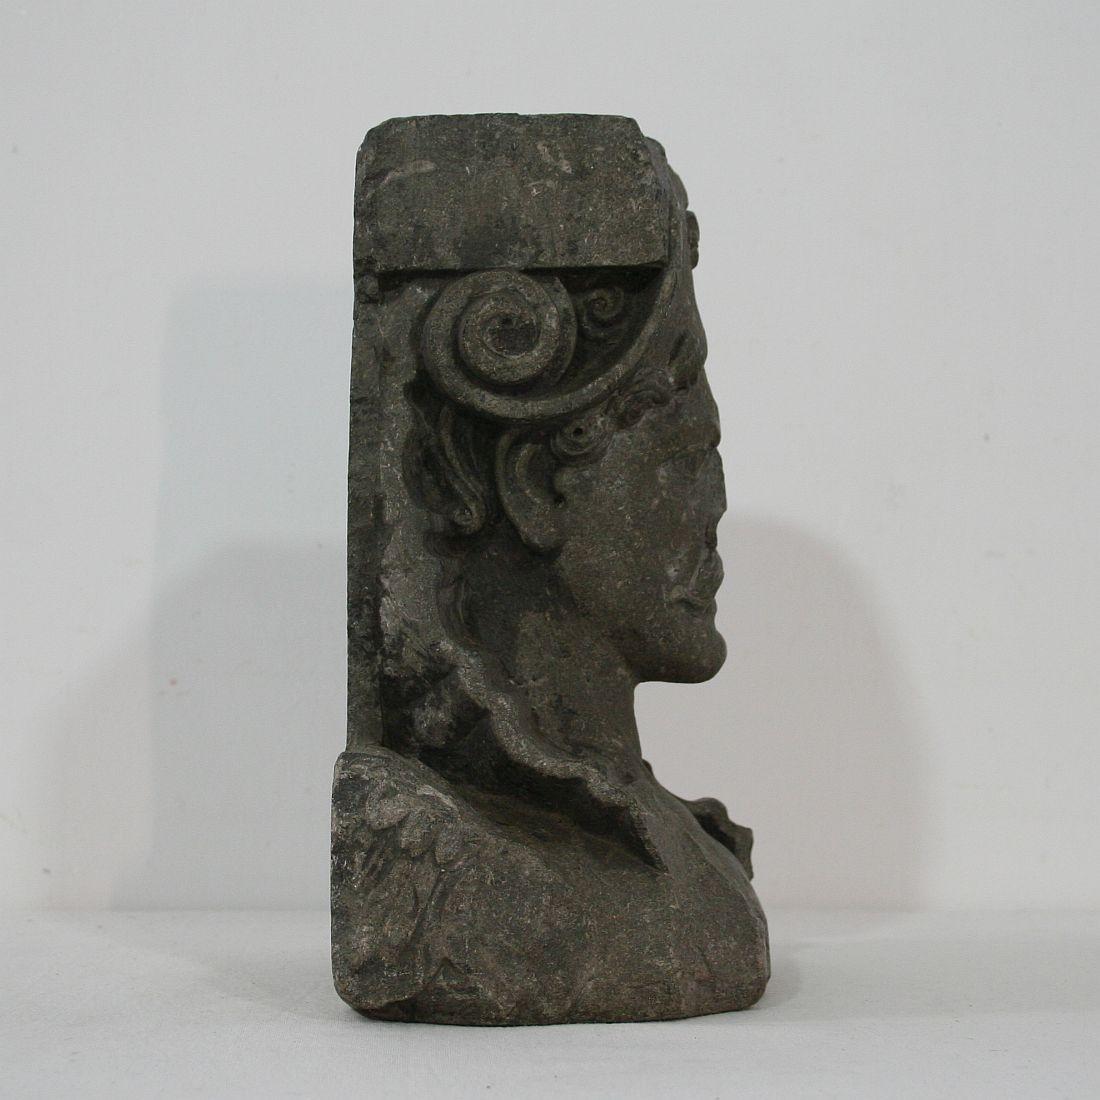 Hand-Carved Early 17th Century Carved Stone Renaissance Bust